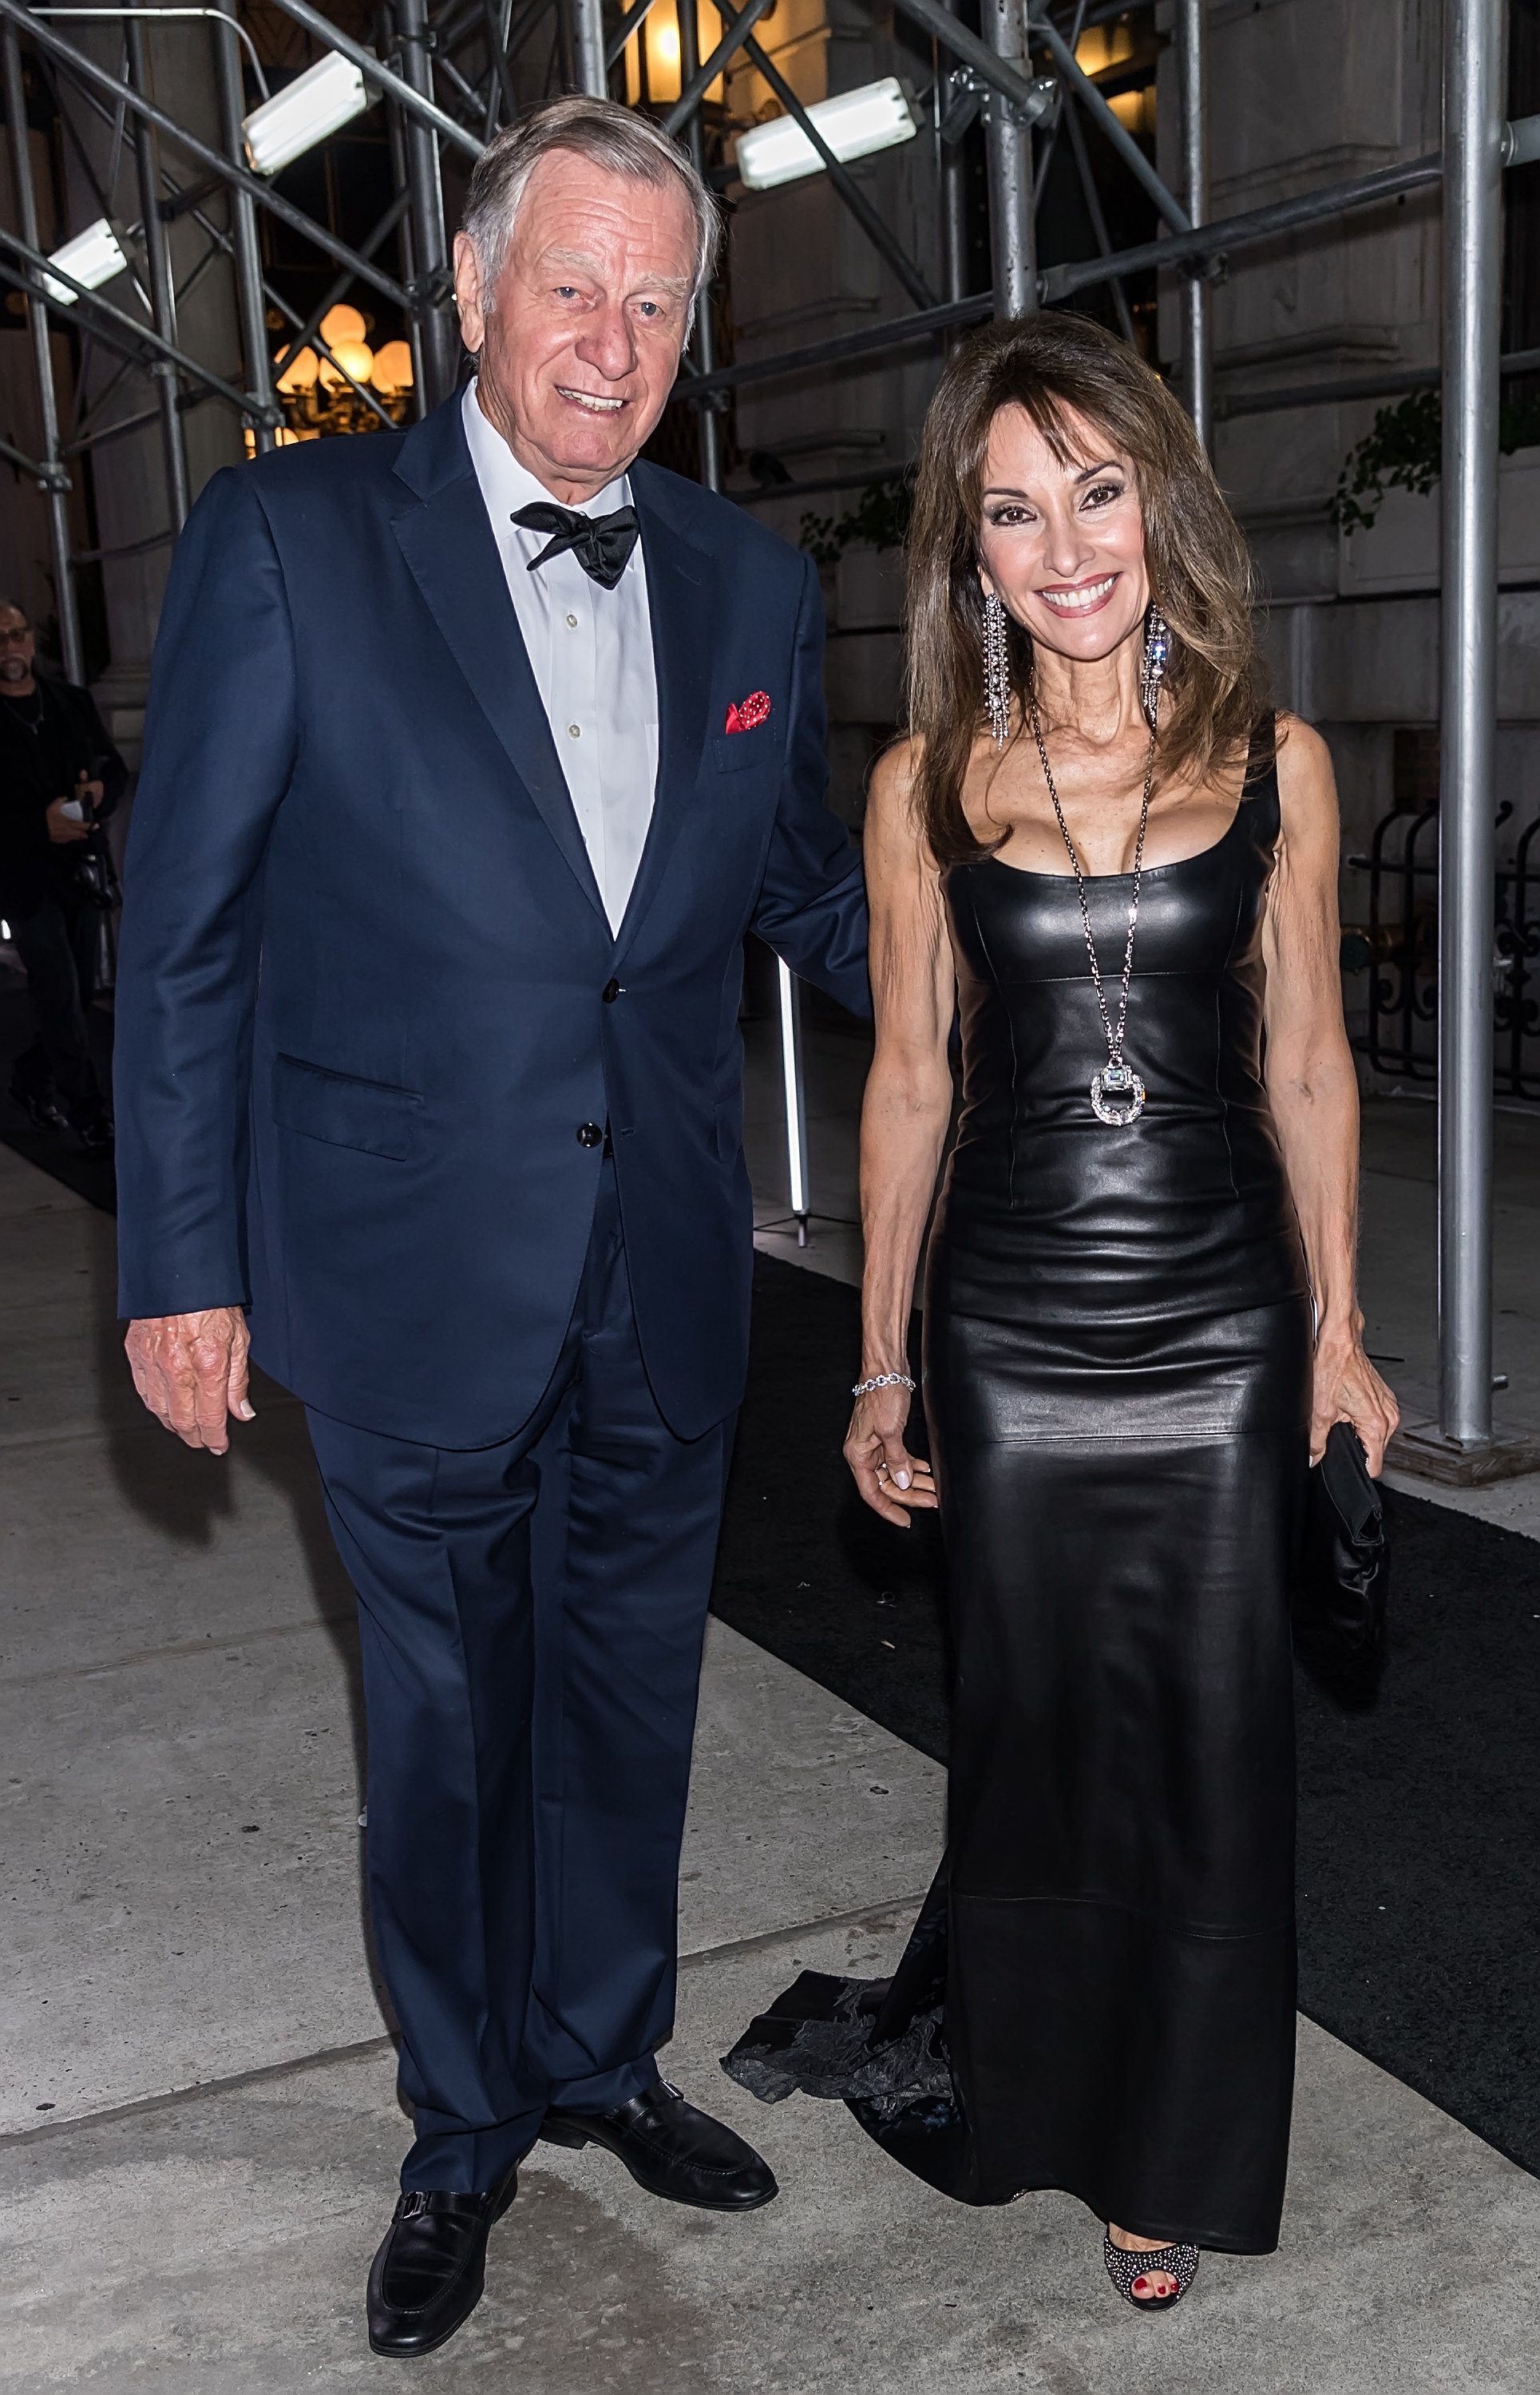 Helmut Huber and actress Susan Lucci are seen leaving the Harper's BAZAAR ICONS Party at The Plaza Hotel on September 7, 2018, in New York City. | Source: Getty Images